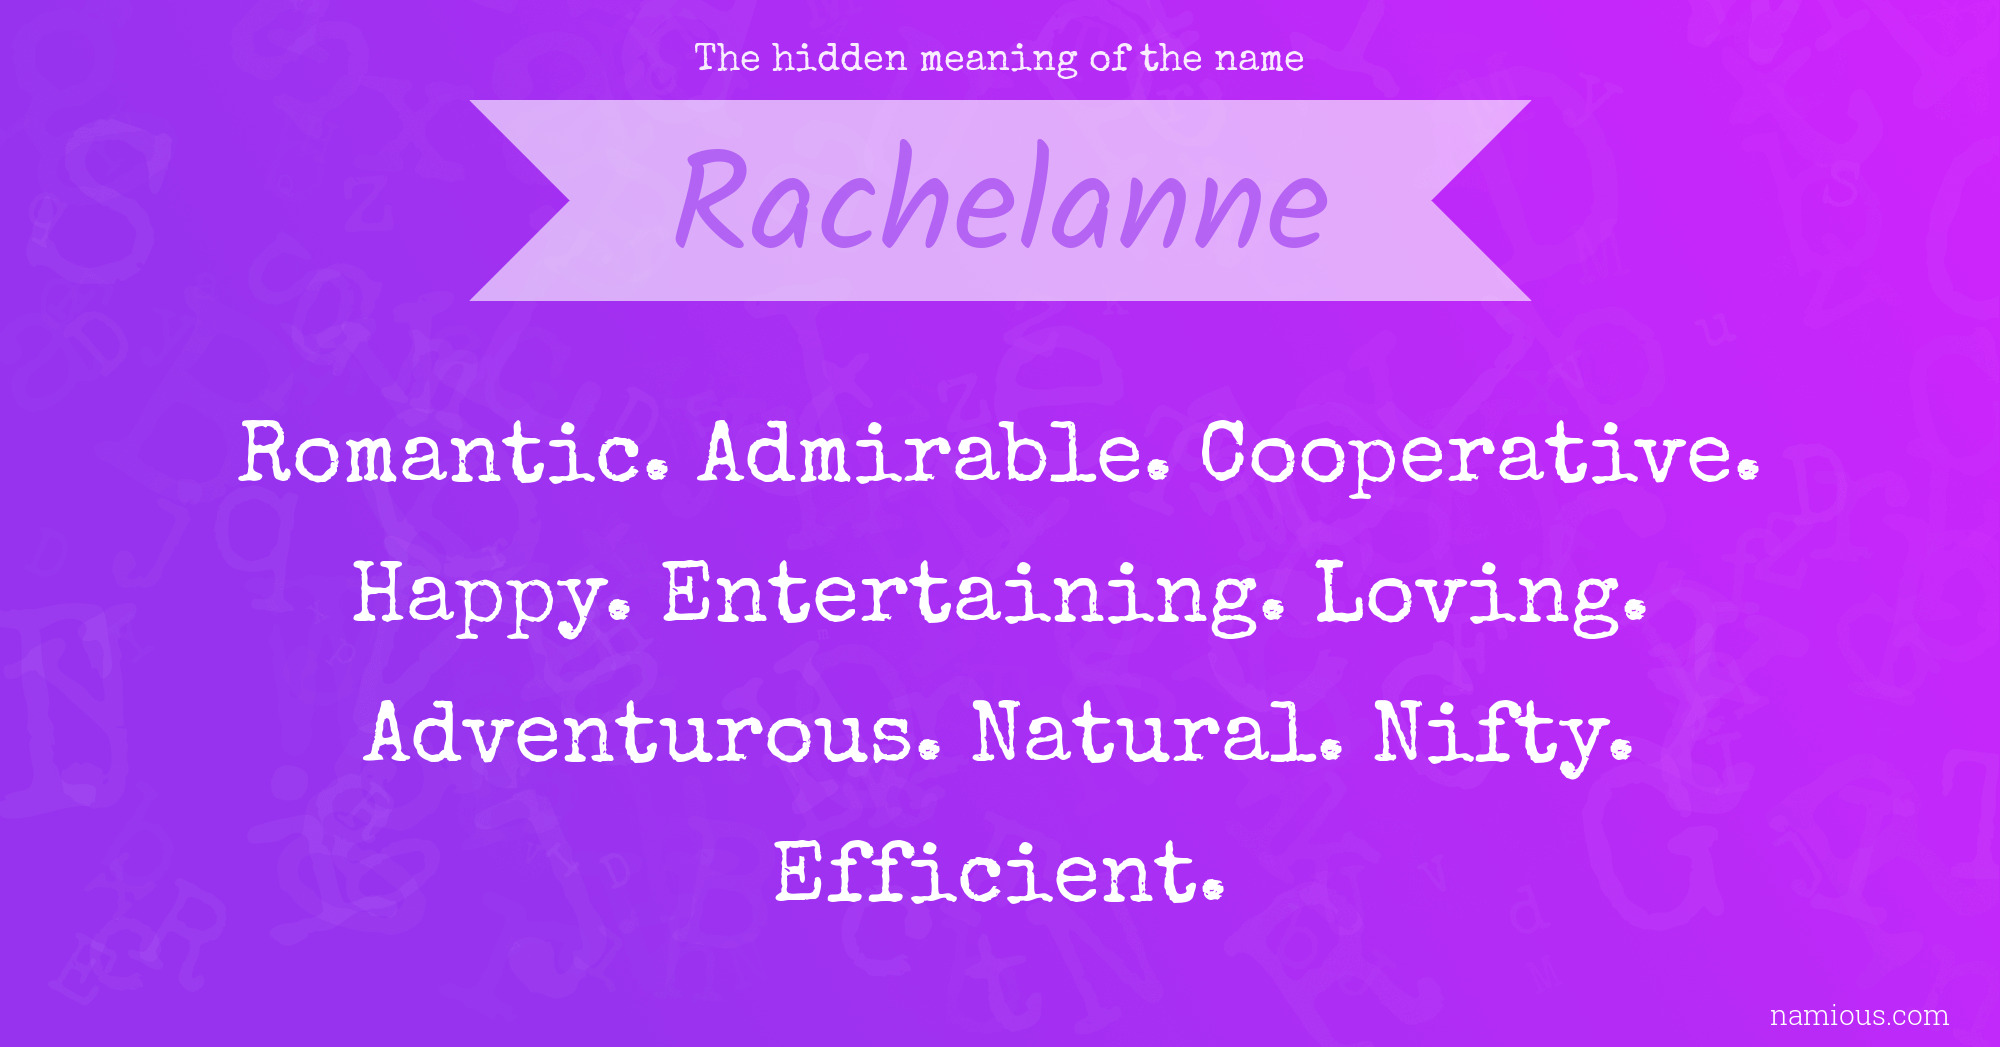 The hidden meaning of the name Rachelanne